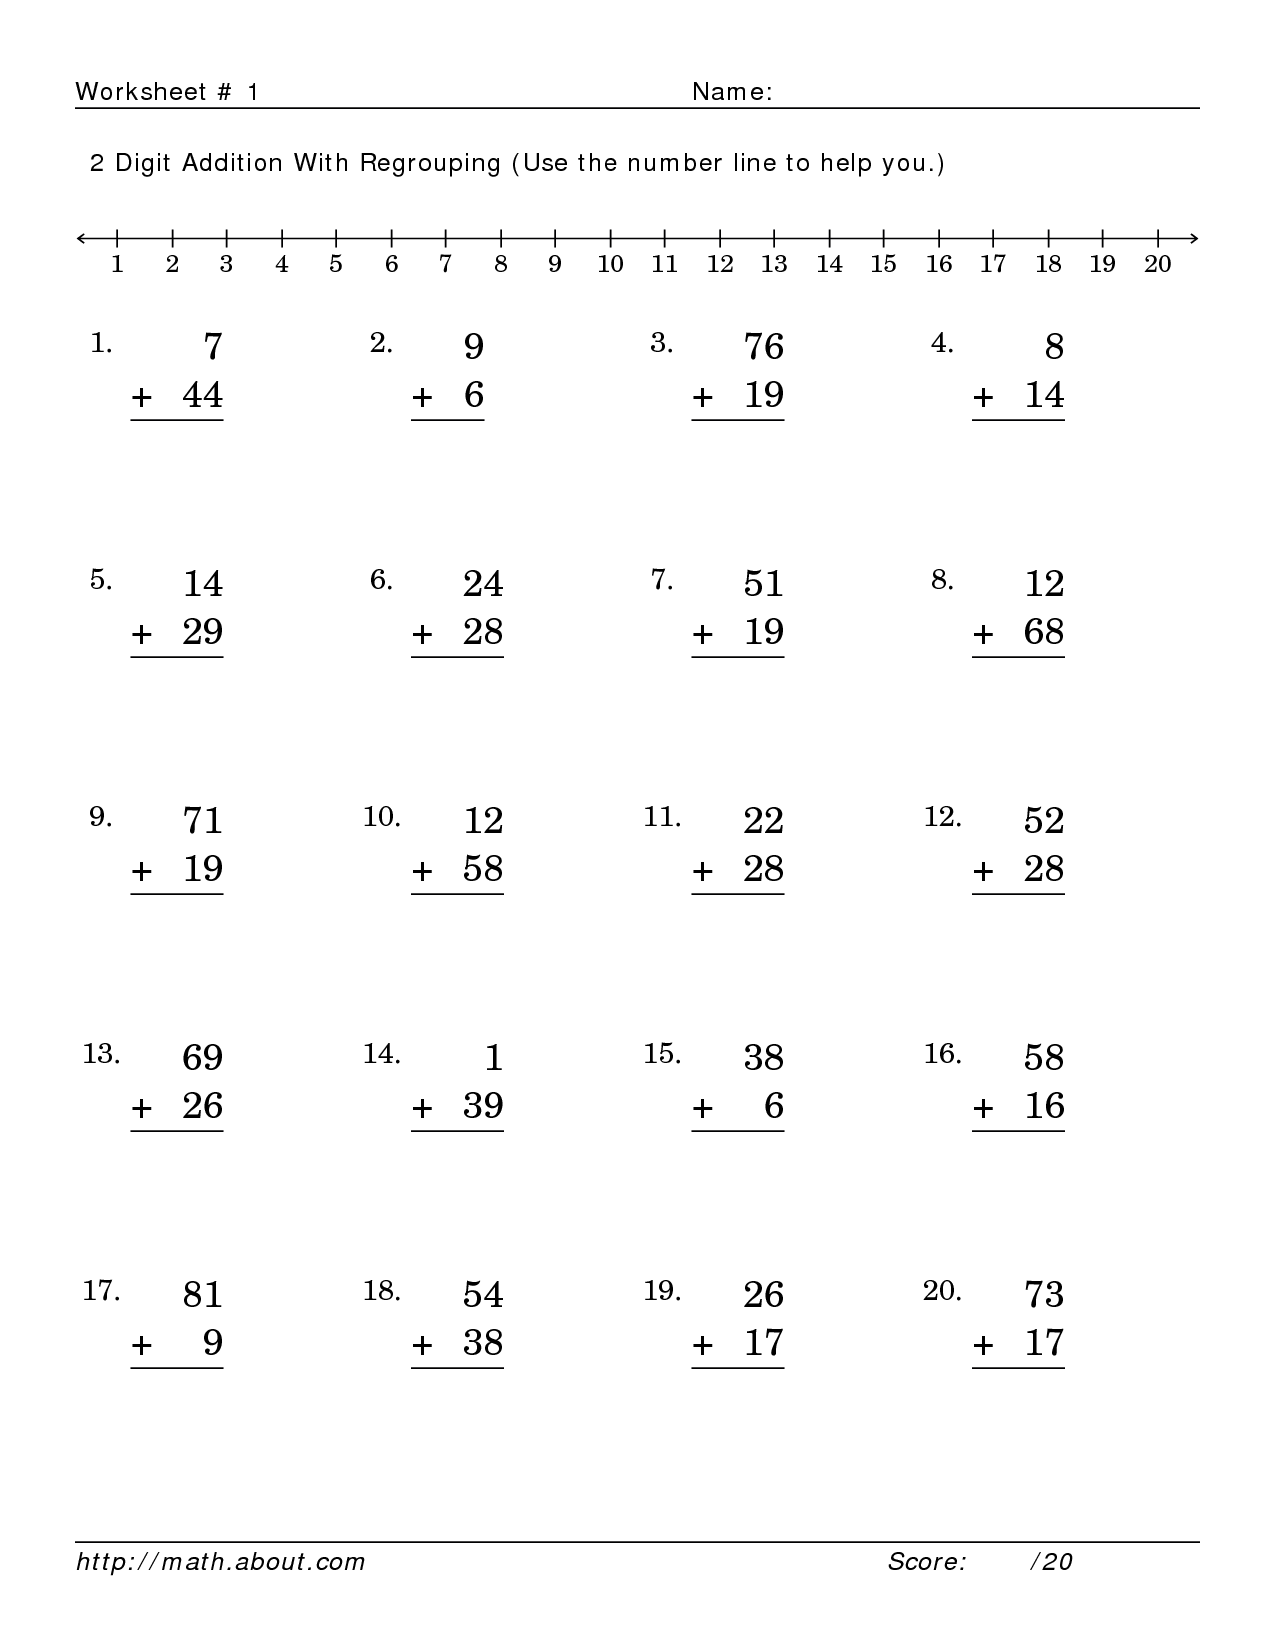 Addition With Regrouping Practice MySchoolsMath